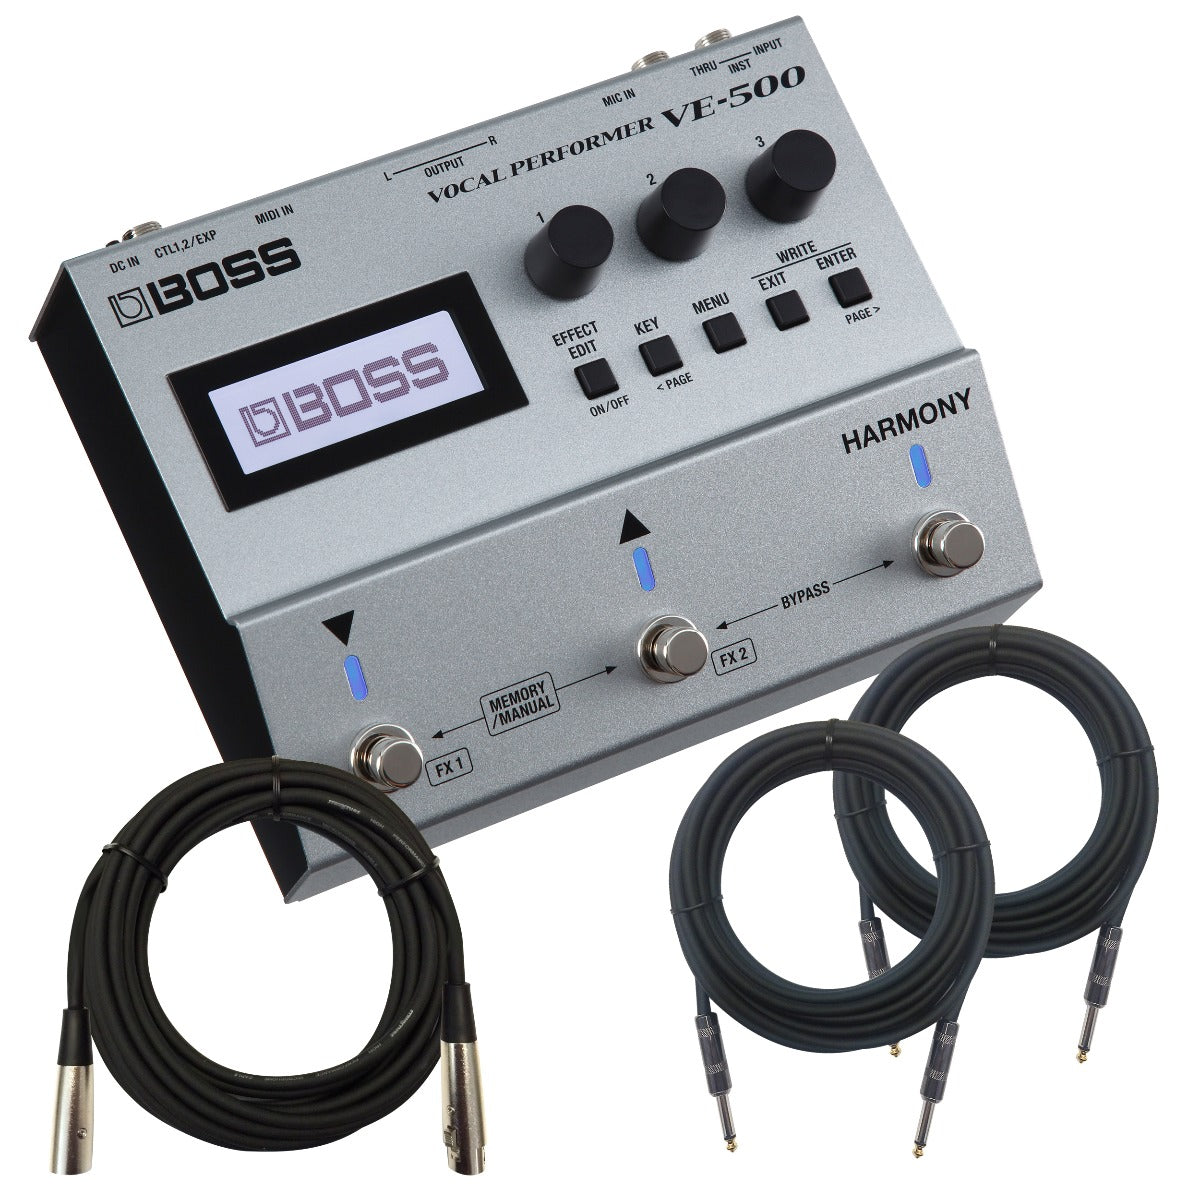 BOSS VE-500 Vocal Performer CABLE KIT